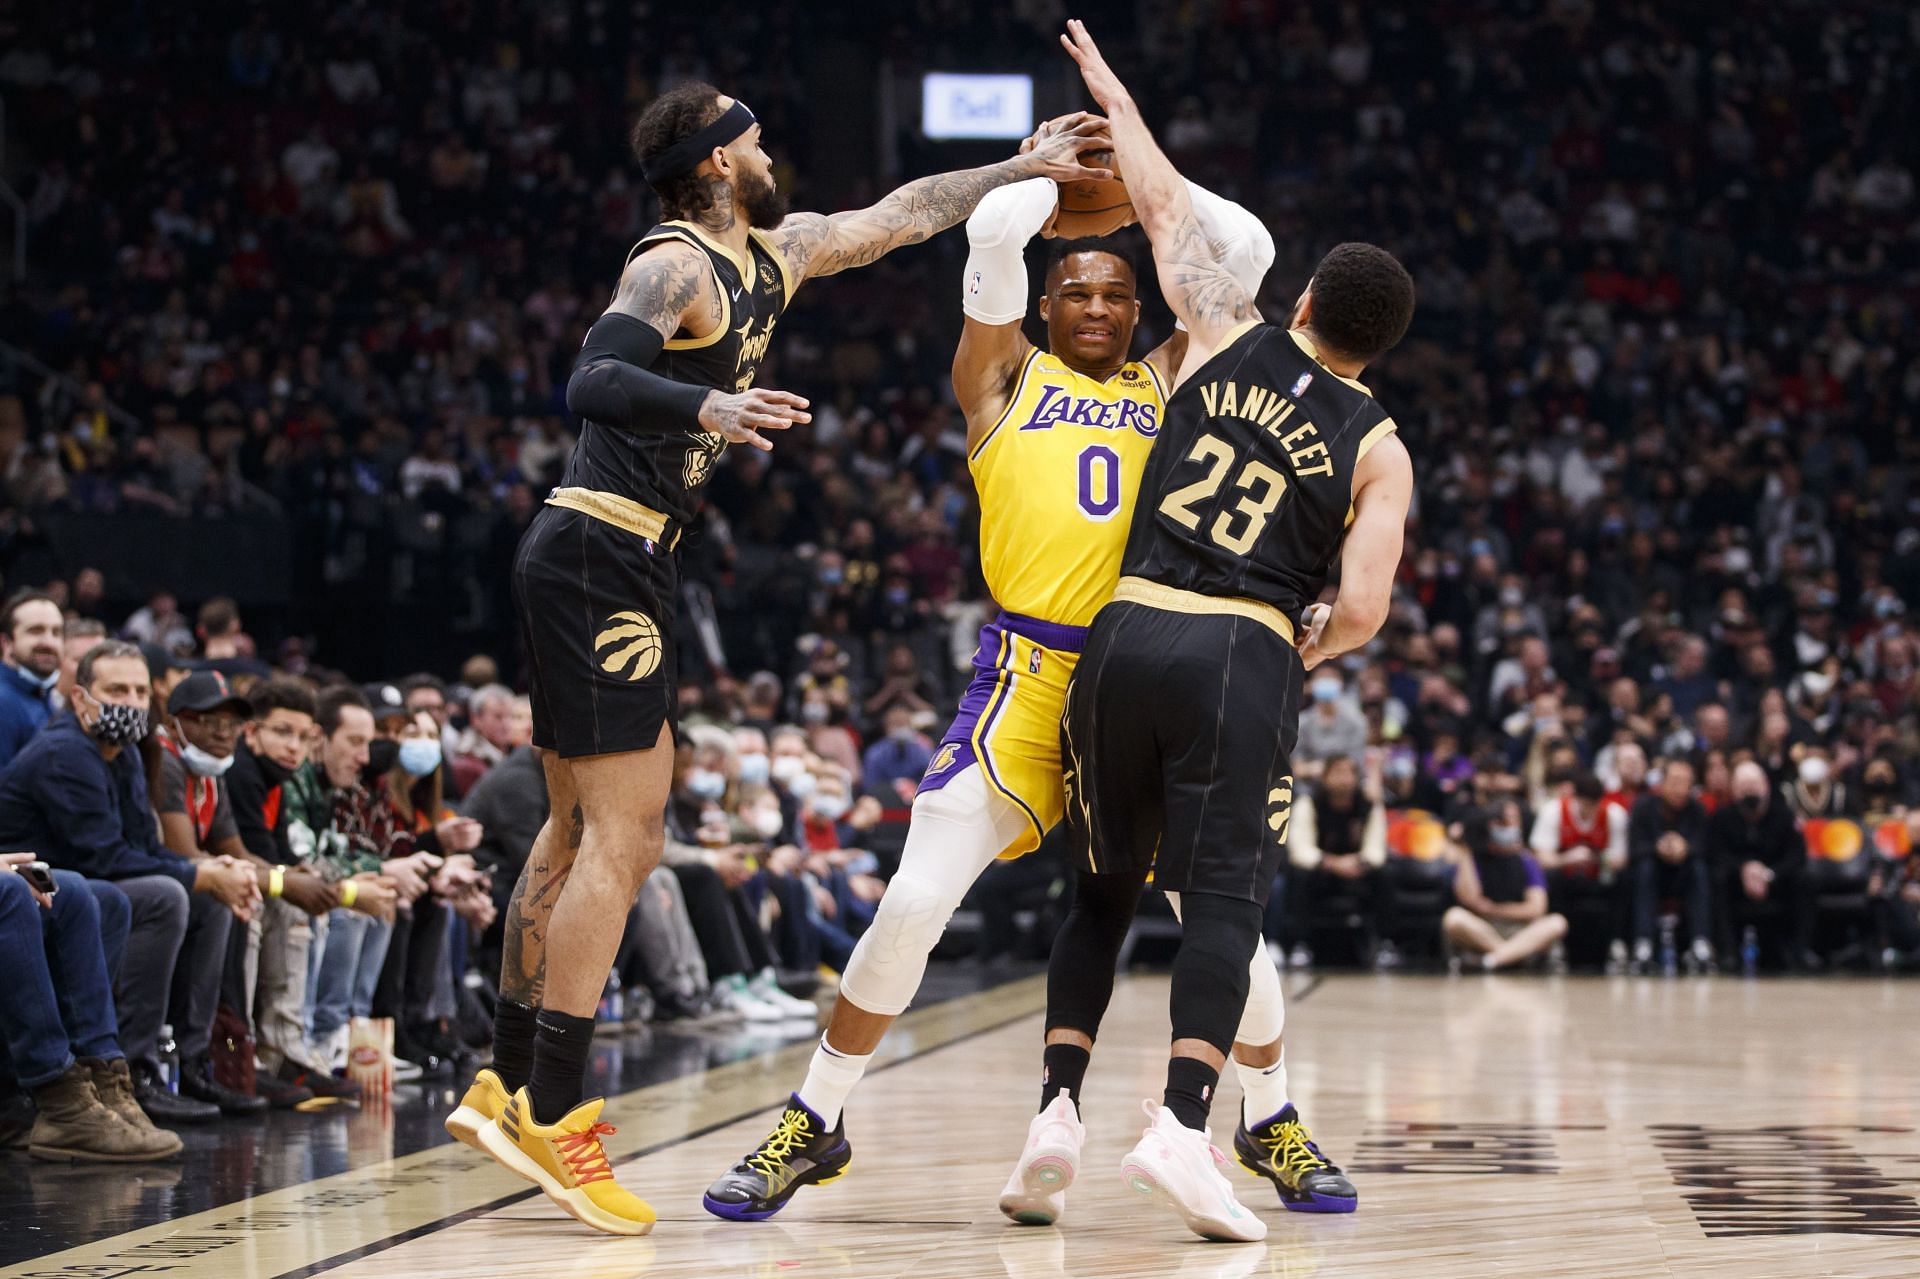 Russell Westbrook (#0) of the Los Angeles Lakers guarded by Fred VanVleet (#23) and Gary Trent Jr. of the Toronto Raptors